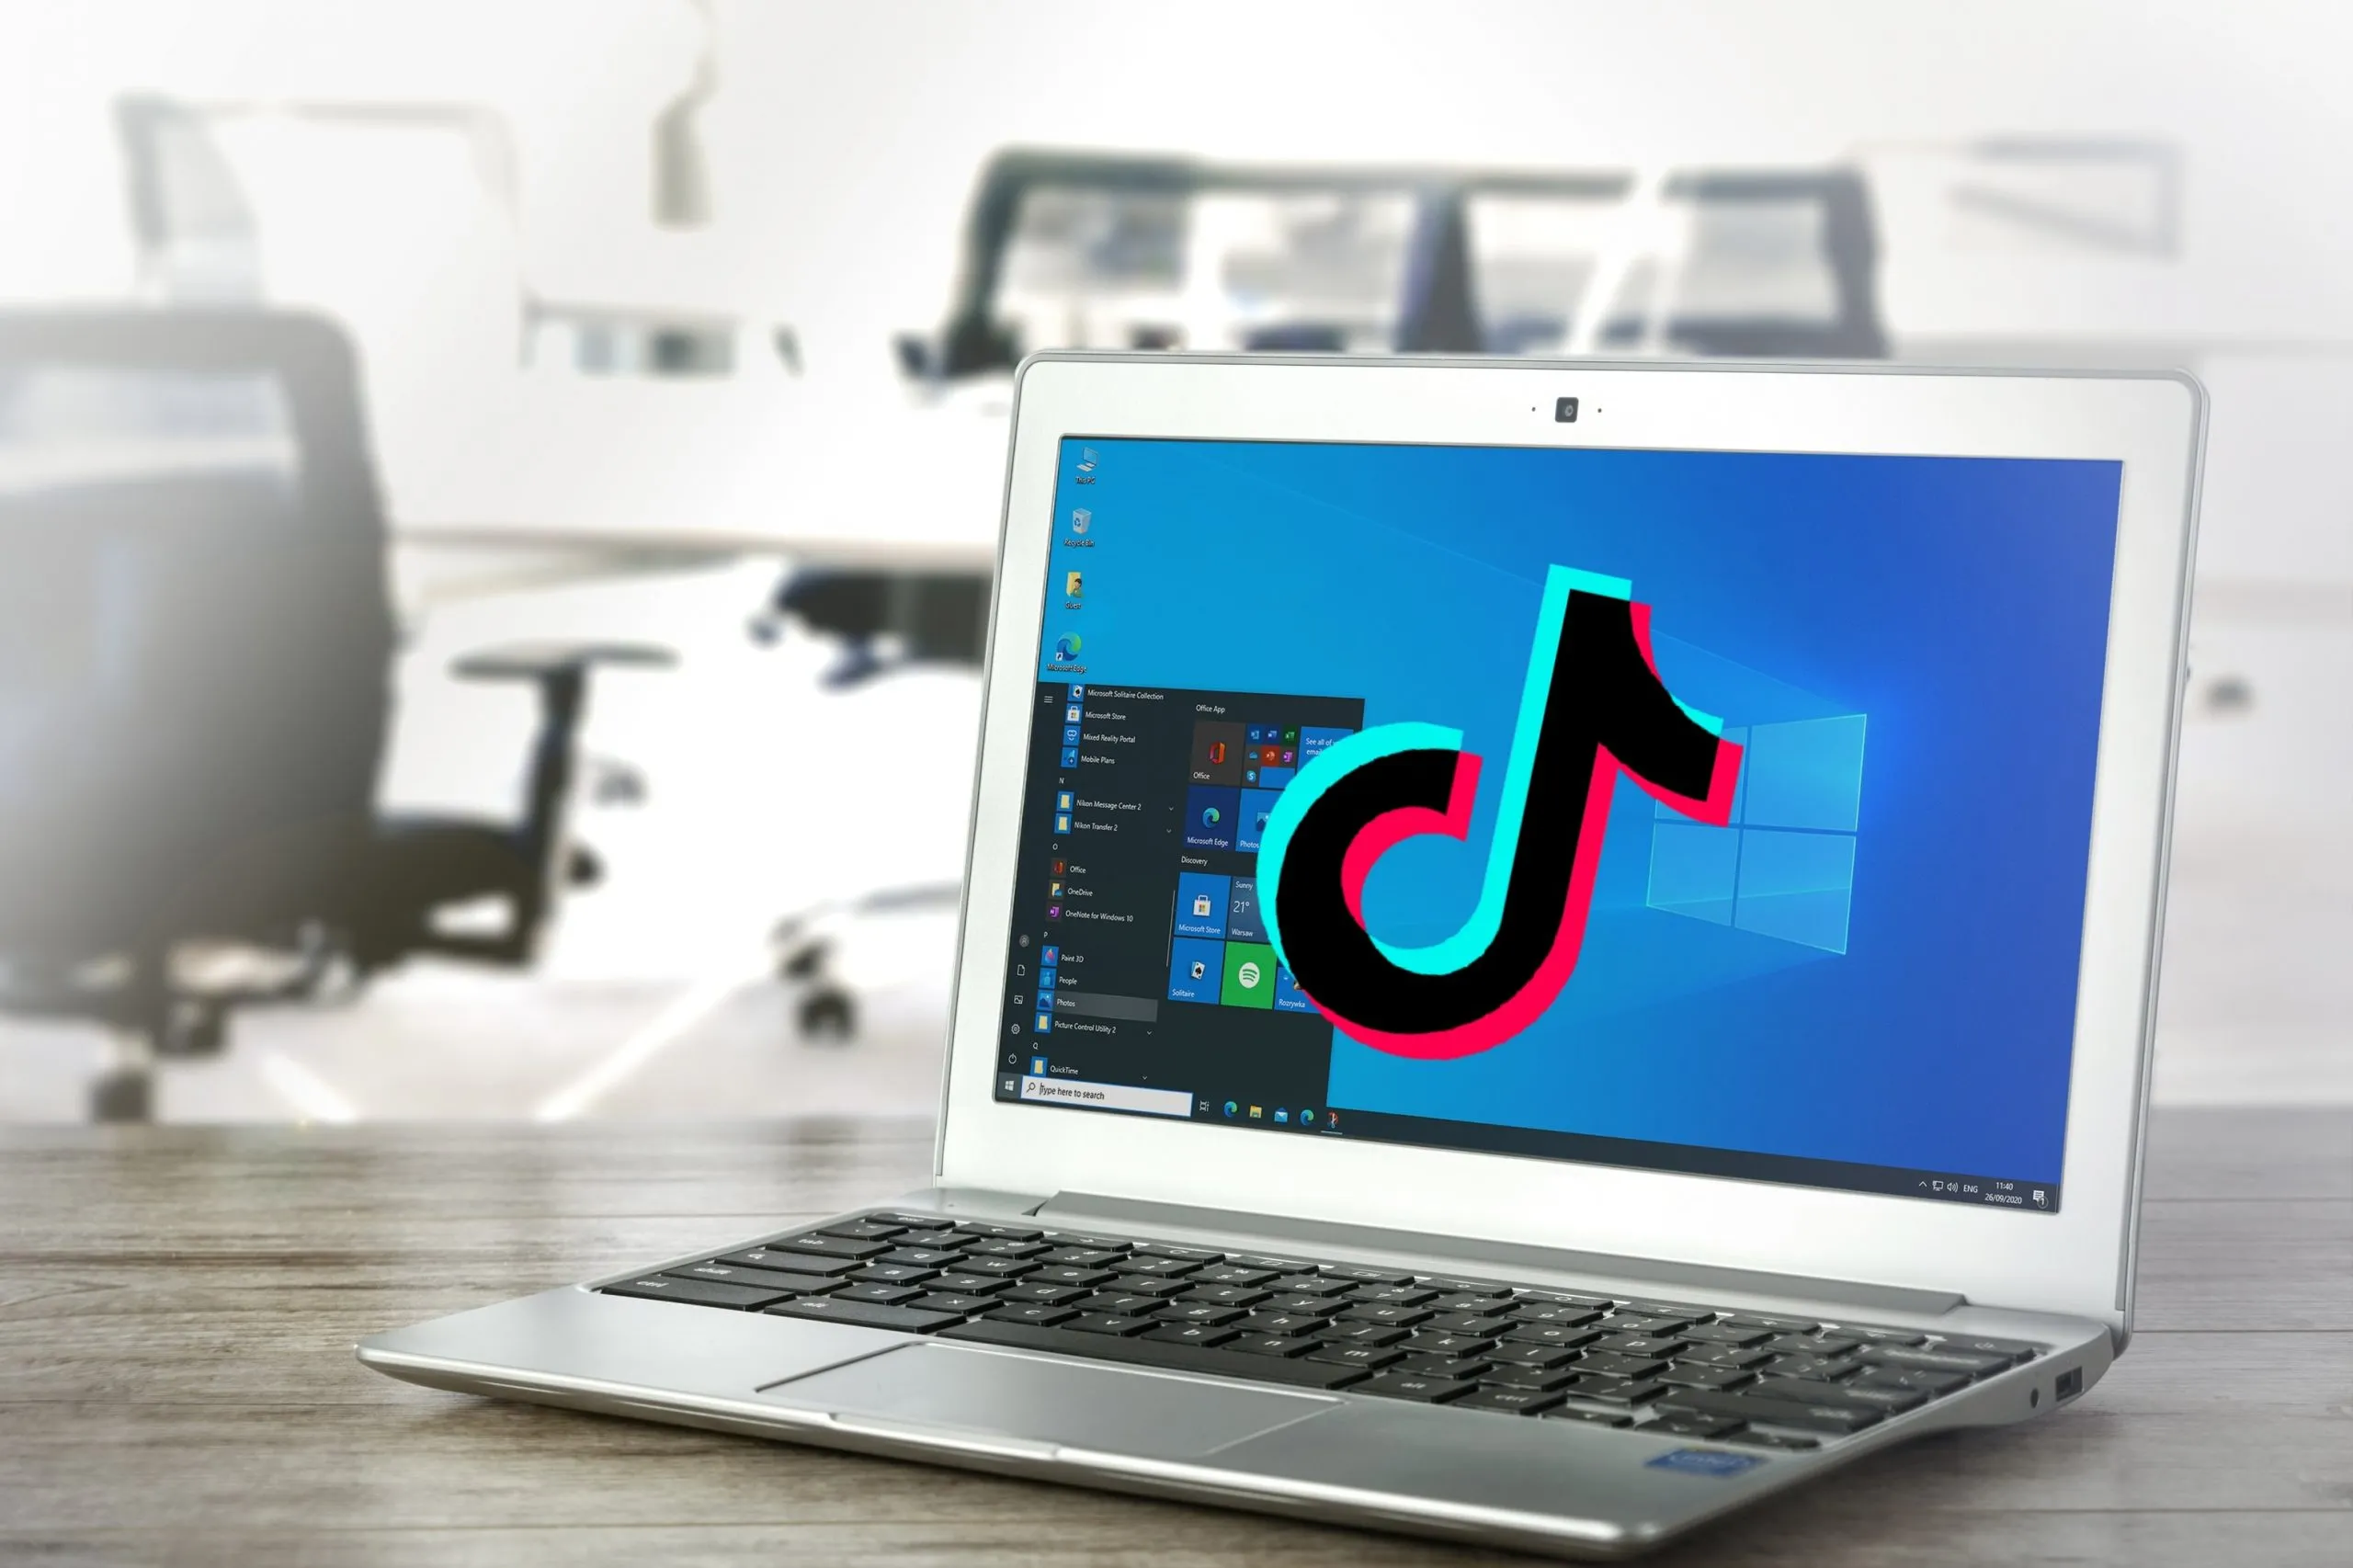 TikTok For PC – Download For Windows 10 PC and macOS